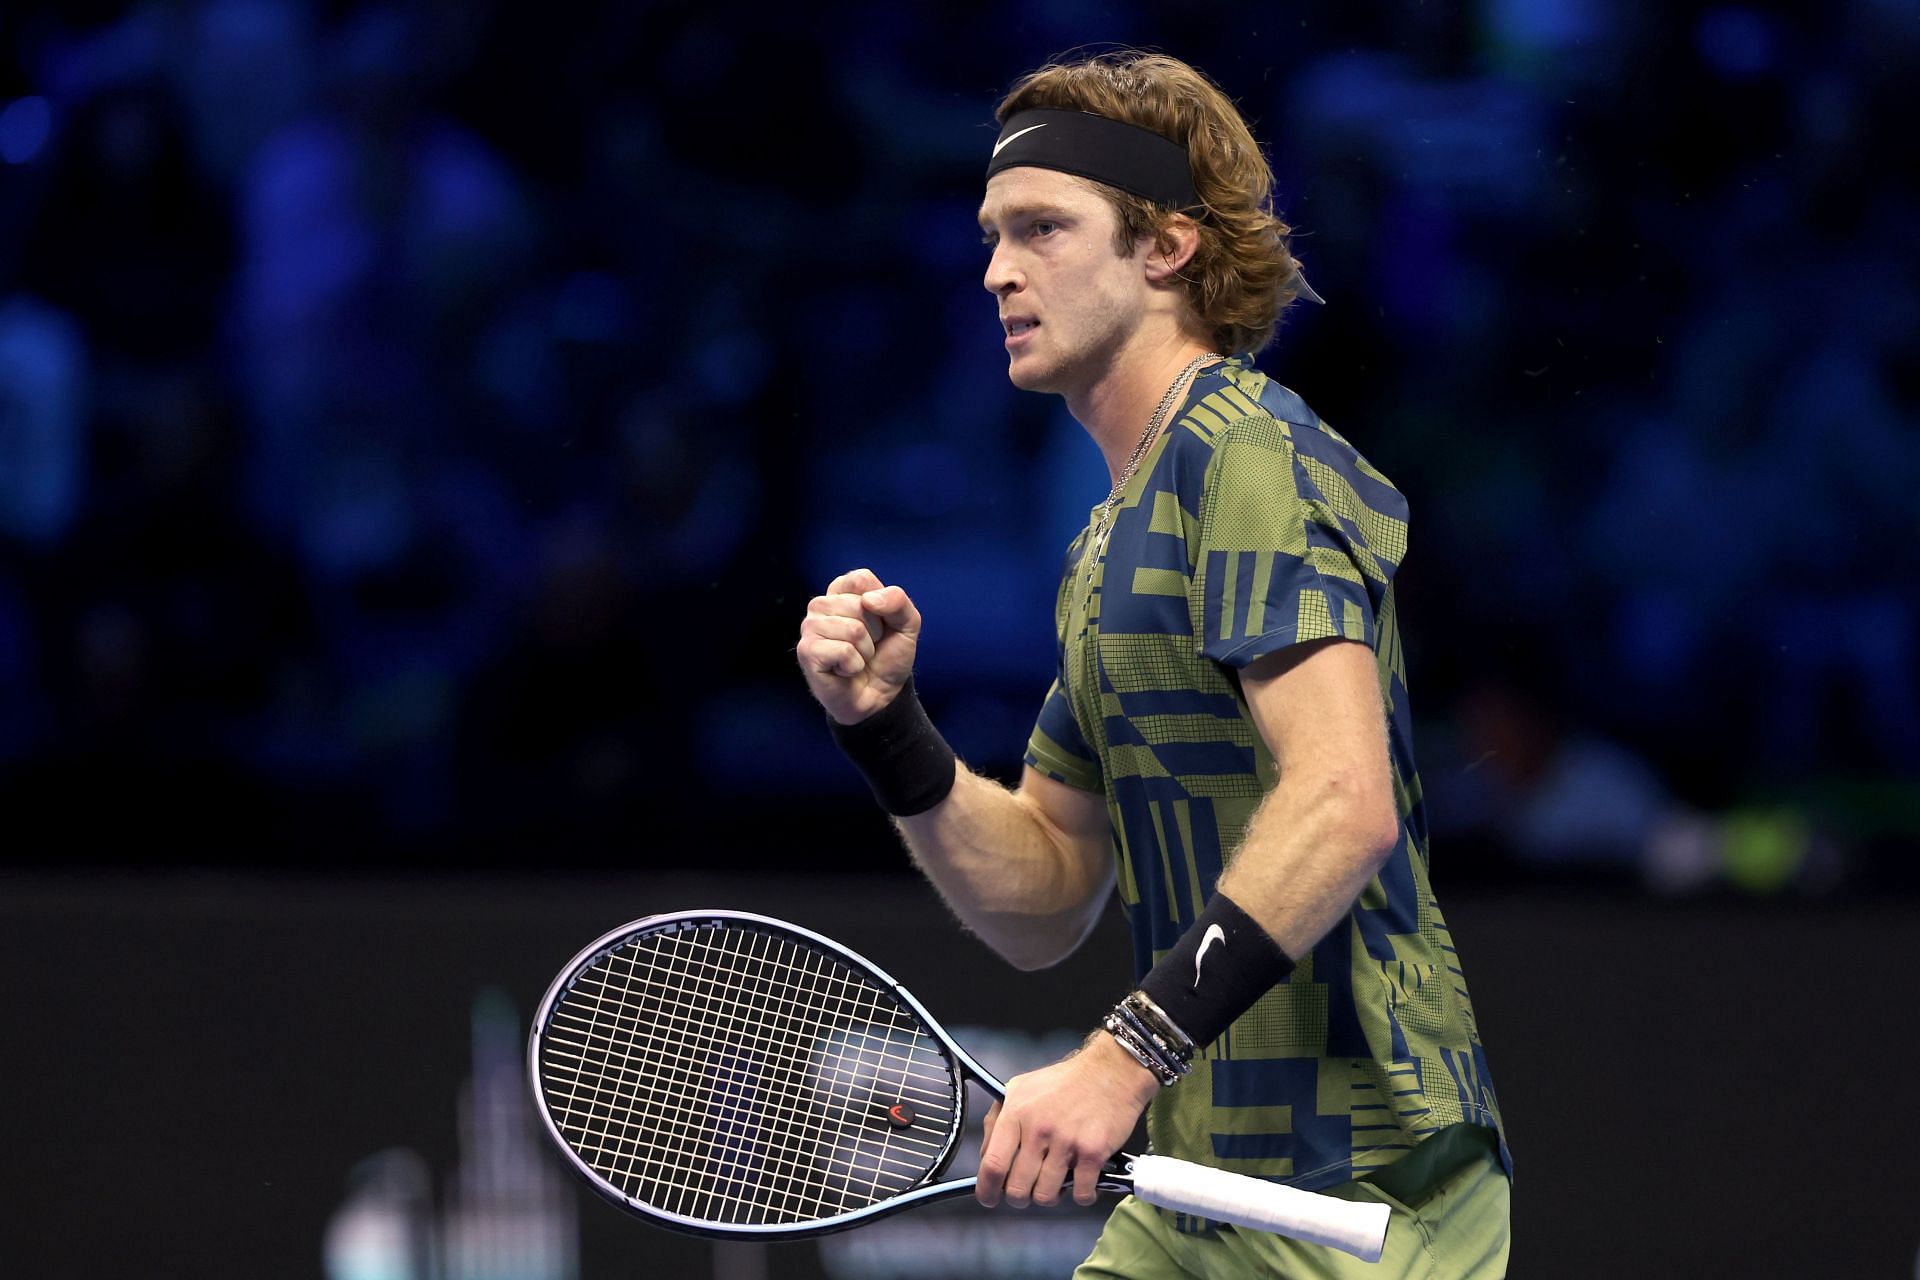 Can Rublev continue his winning run at the ATP Finals?